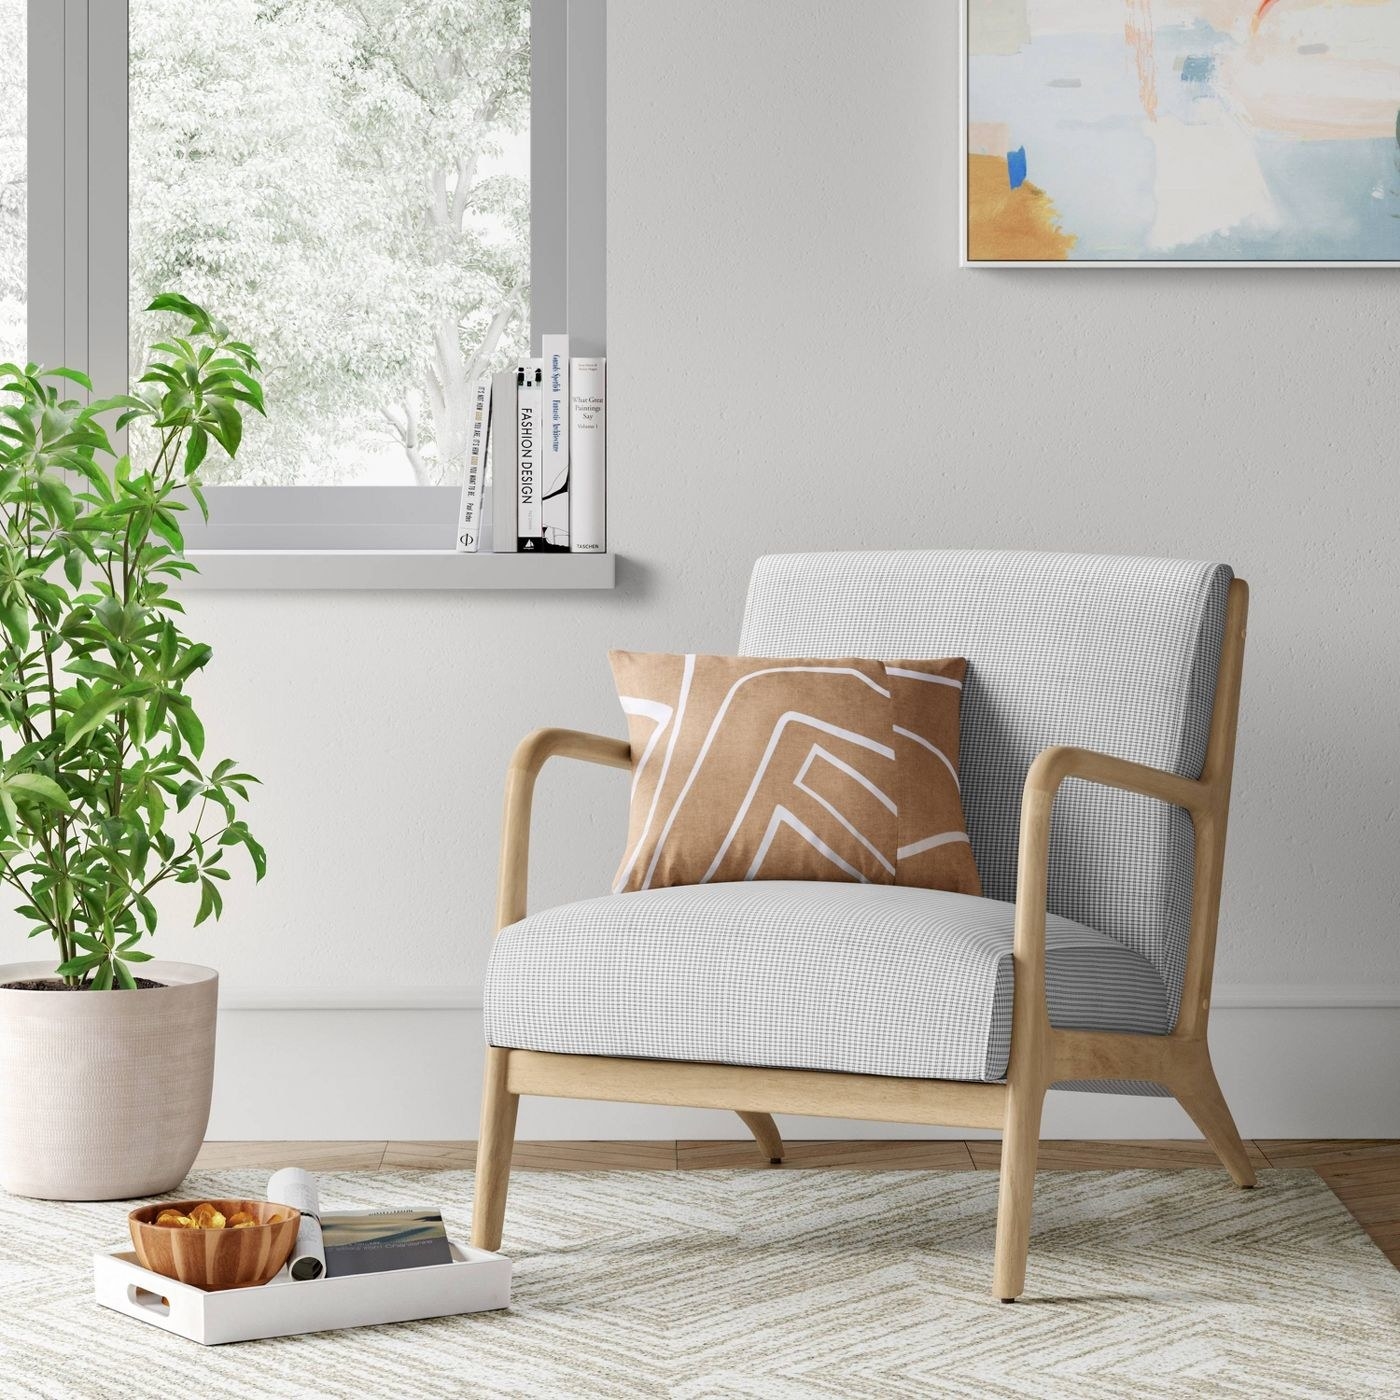 A wood accent chair next to a plant